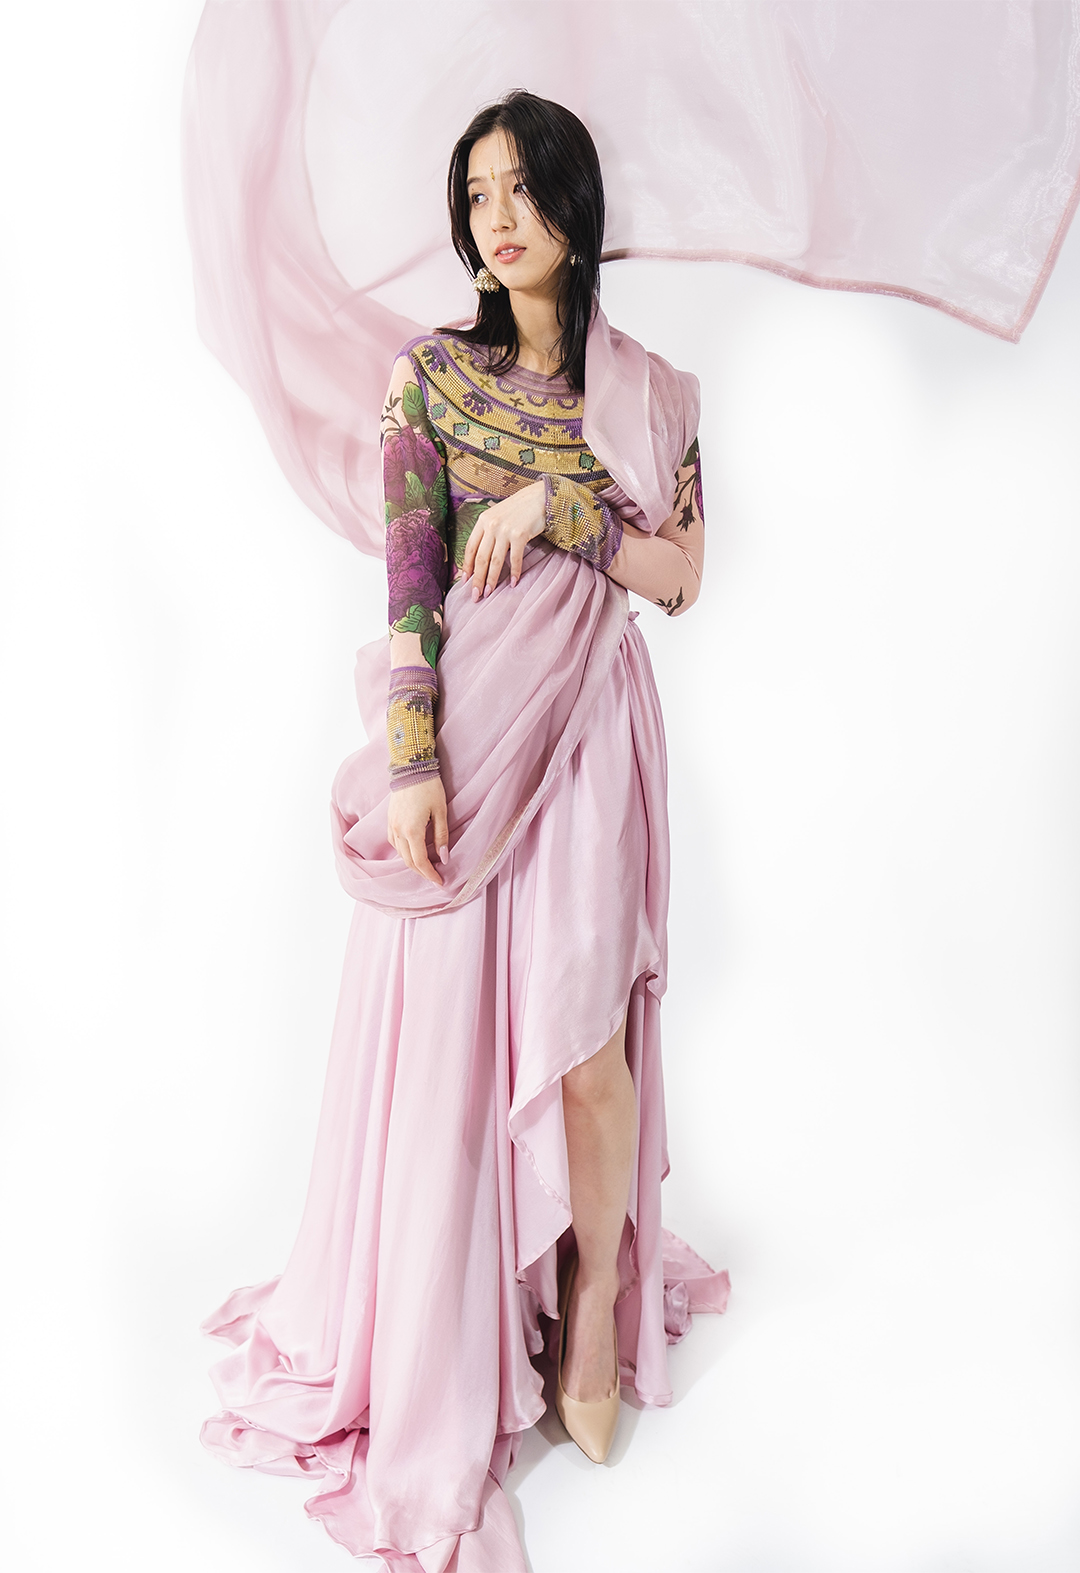 This shot is a sneak peek of the complete look of the dress, with the skirt and its high and low hems, the beautiful organza wrap, and the custom-printed bodysuit with the 3D-printed neckpiece. The overall appearance portrays a contemporary take on the traditional Indian saree.